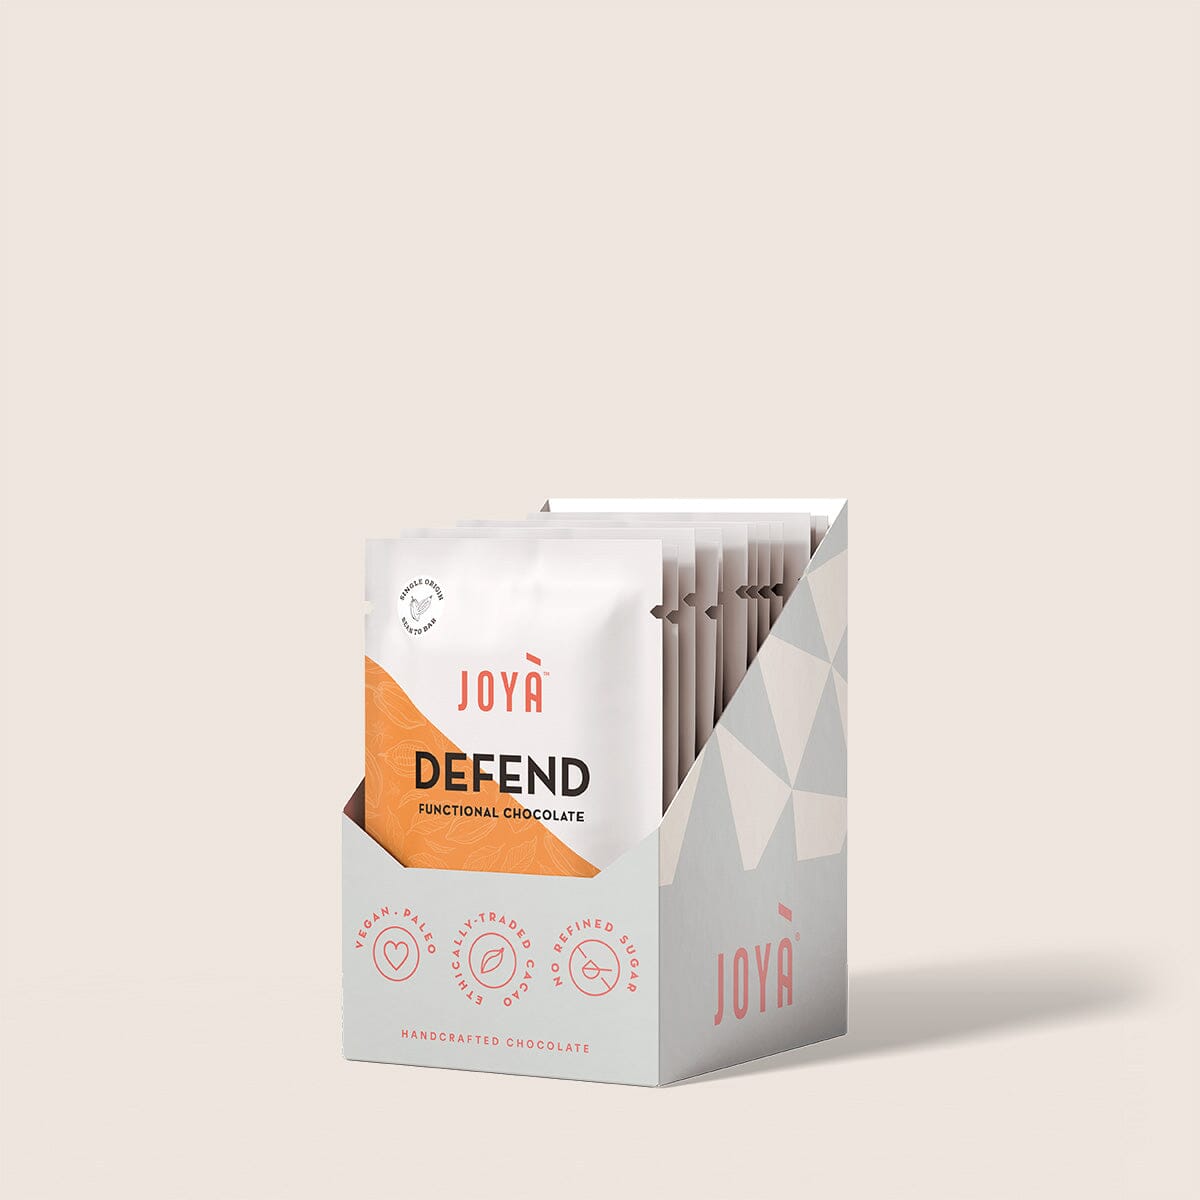 Defend Chocolate Bars in 12 pack box

          